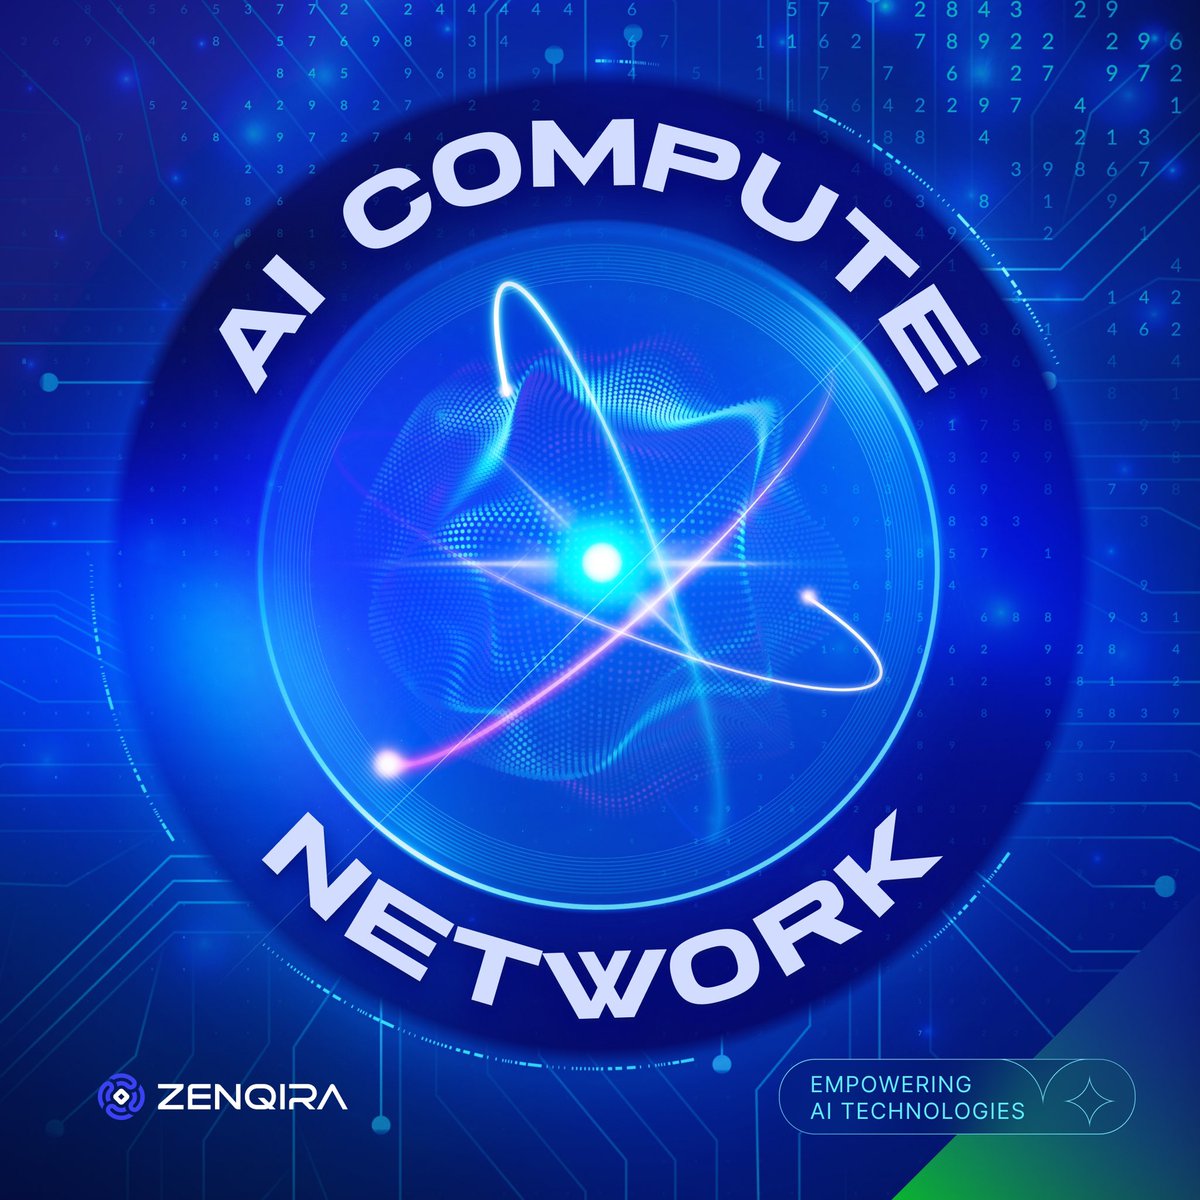 Zenqira is quantum-ready! Explore the frontier of technology with our platform designed for the next era of computing. ⚛️🌌

#FutureTech #DePIN #ai #zenqira #golemnetwork #cloudcomputing #aicomputing